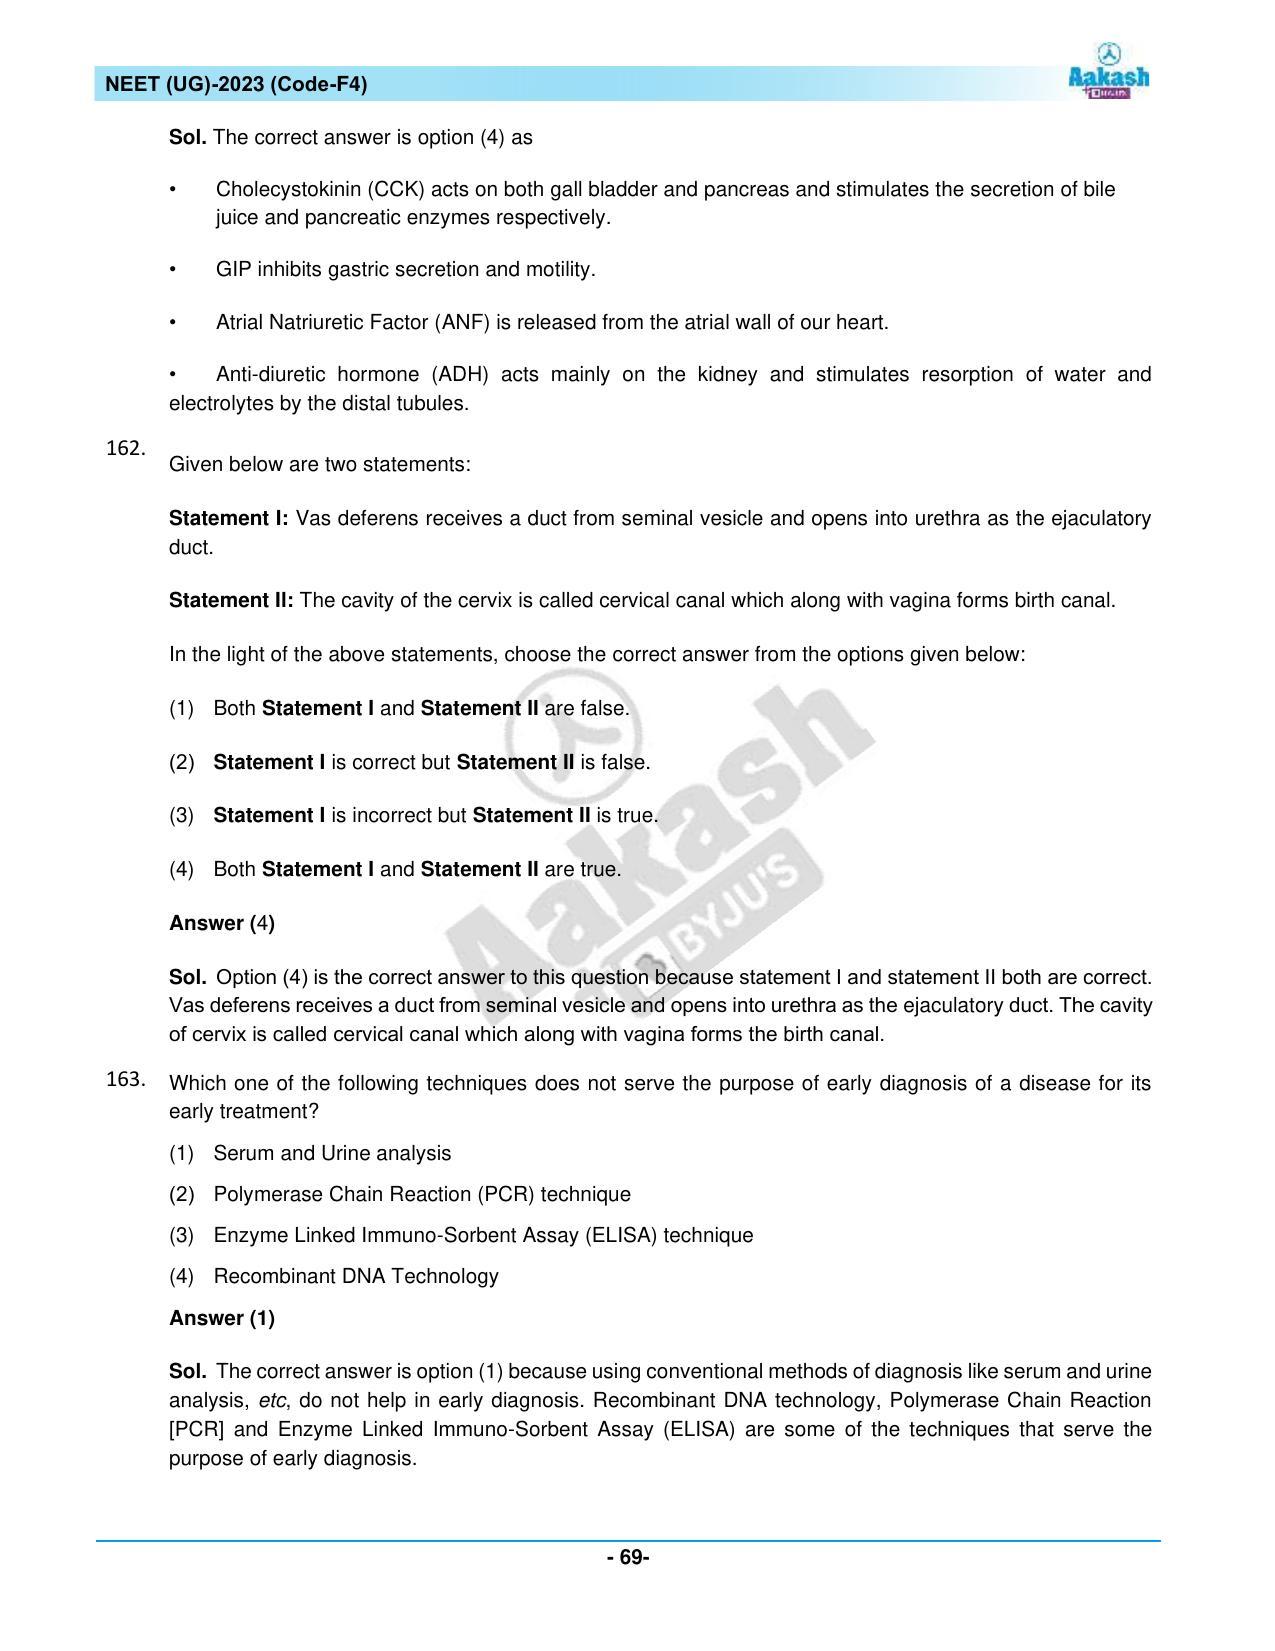 NEET 2023 Question Paper F4 - Page 69